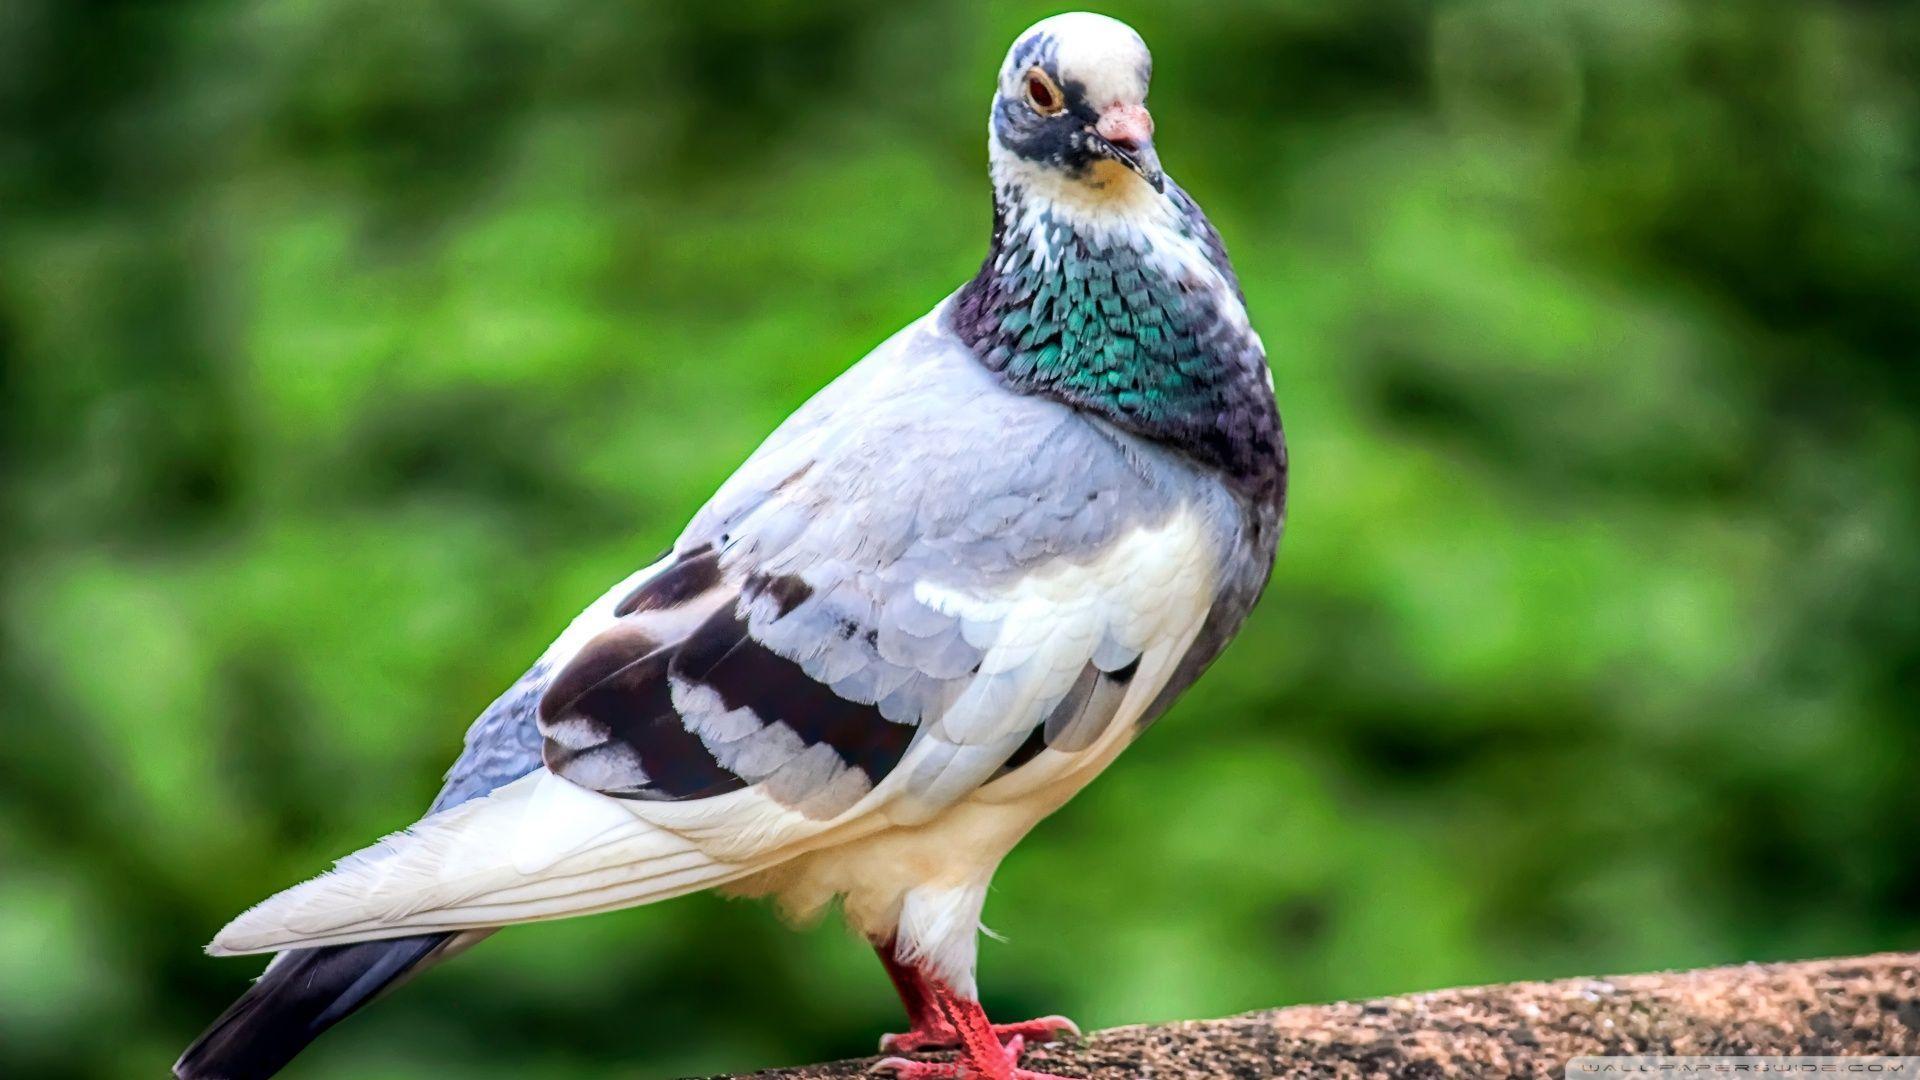 Amazing Pigeon Colorful HD Image Wallpaper Photo Free Download